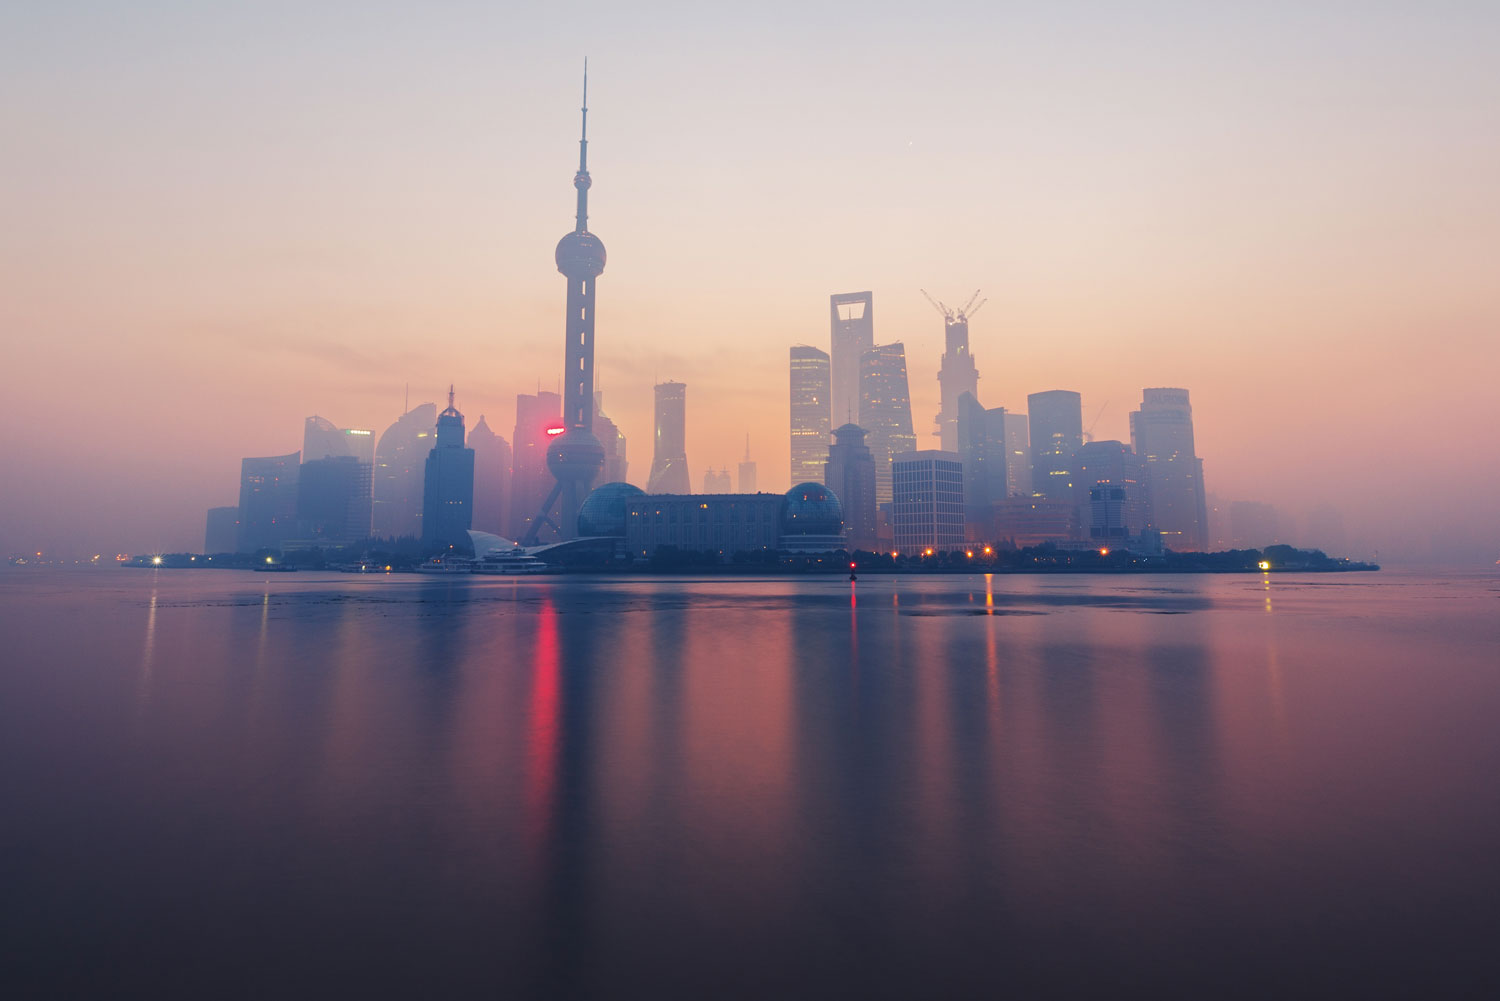 Looking behind the new face of Shanghai.